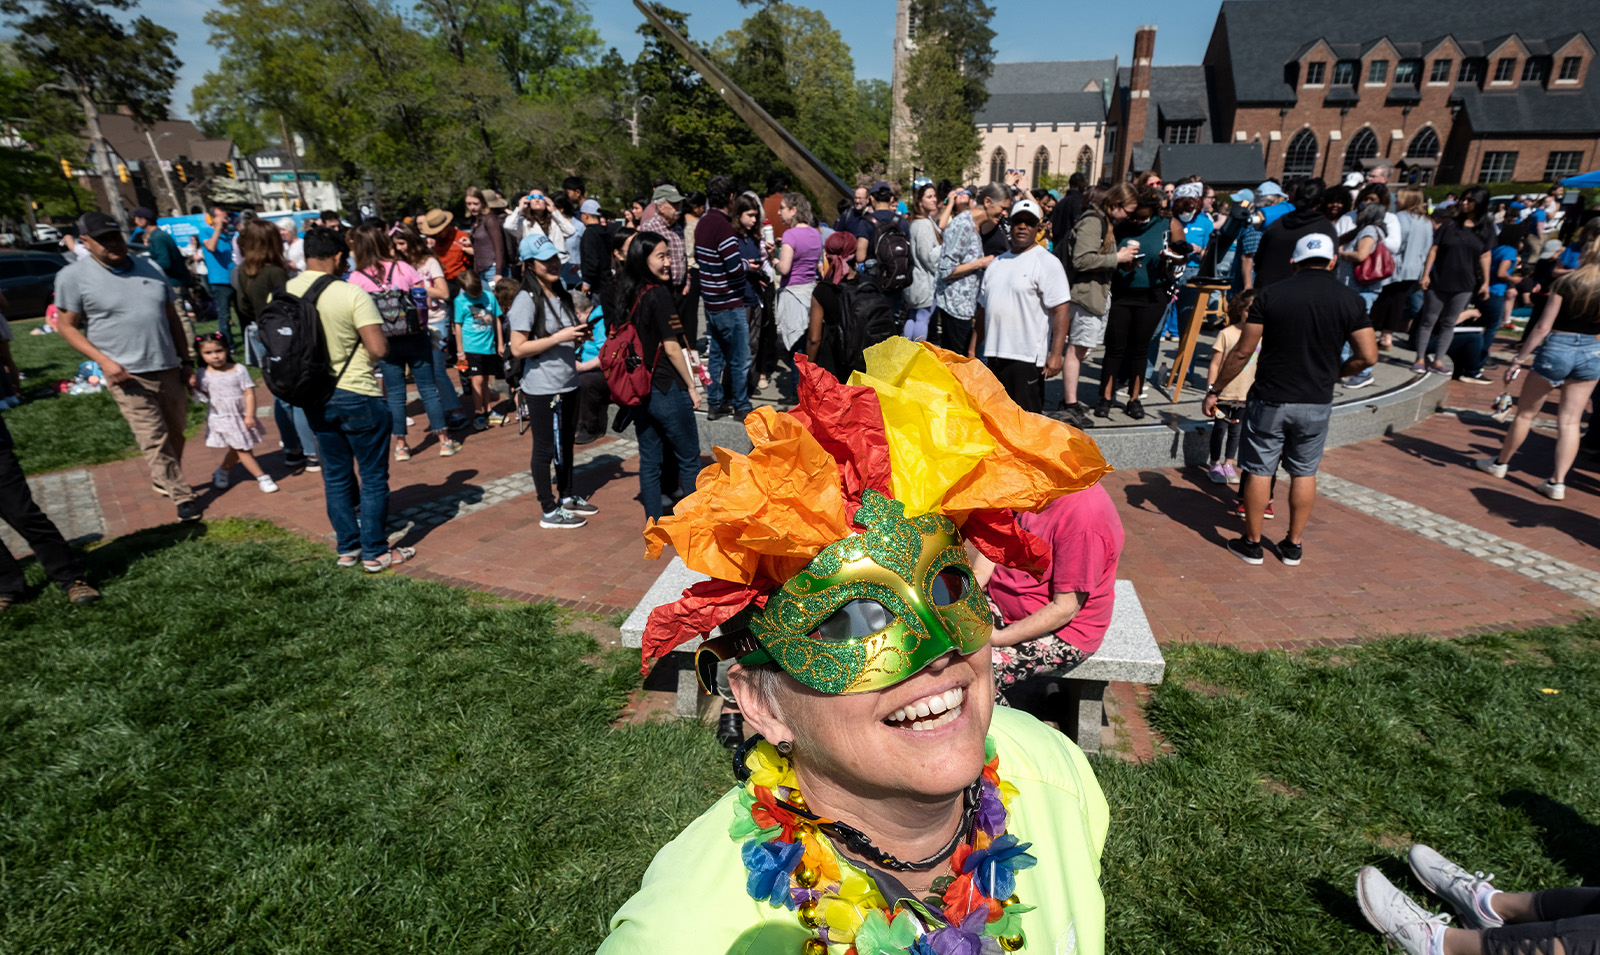 A woman wearing a costume looking at the solar eclipse. A crowd of people is seen behind her.